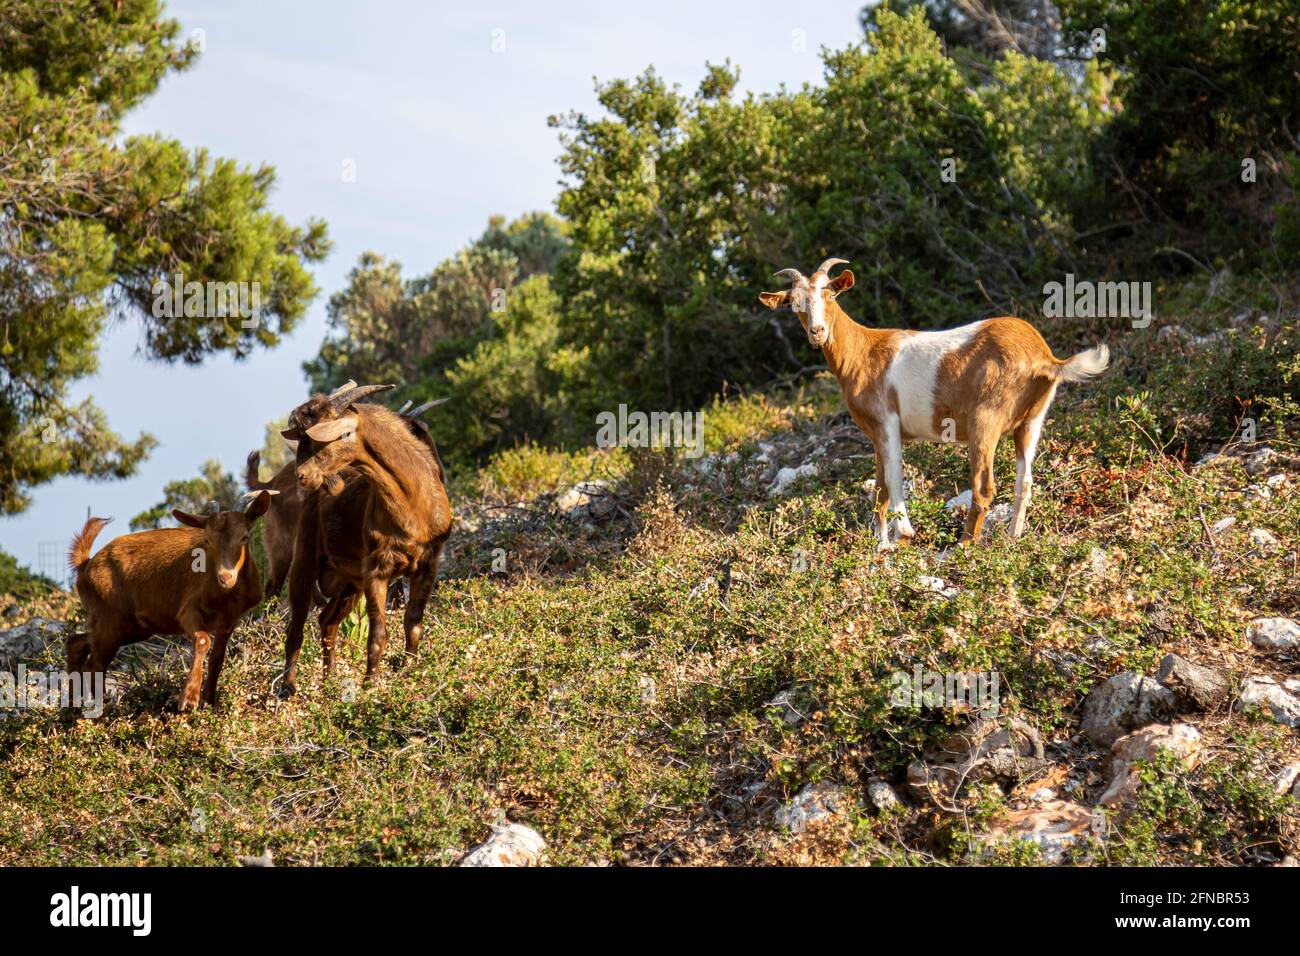 Small herd of goats standing on a hill, looking into camera at sunset on a Greece island. Stock Photo